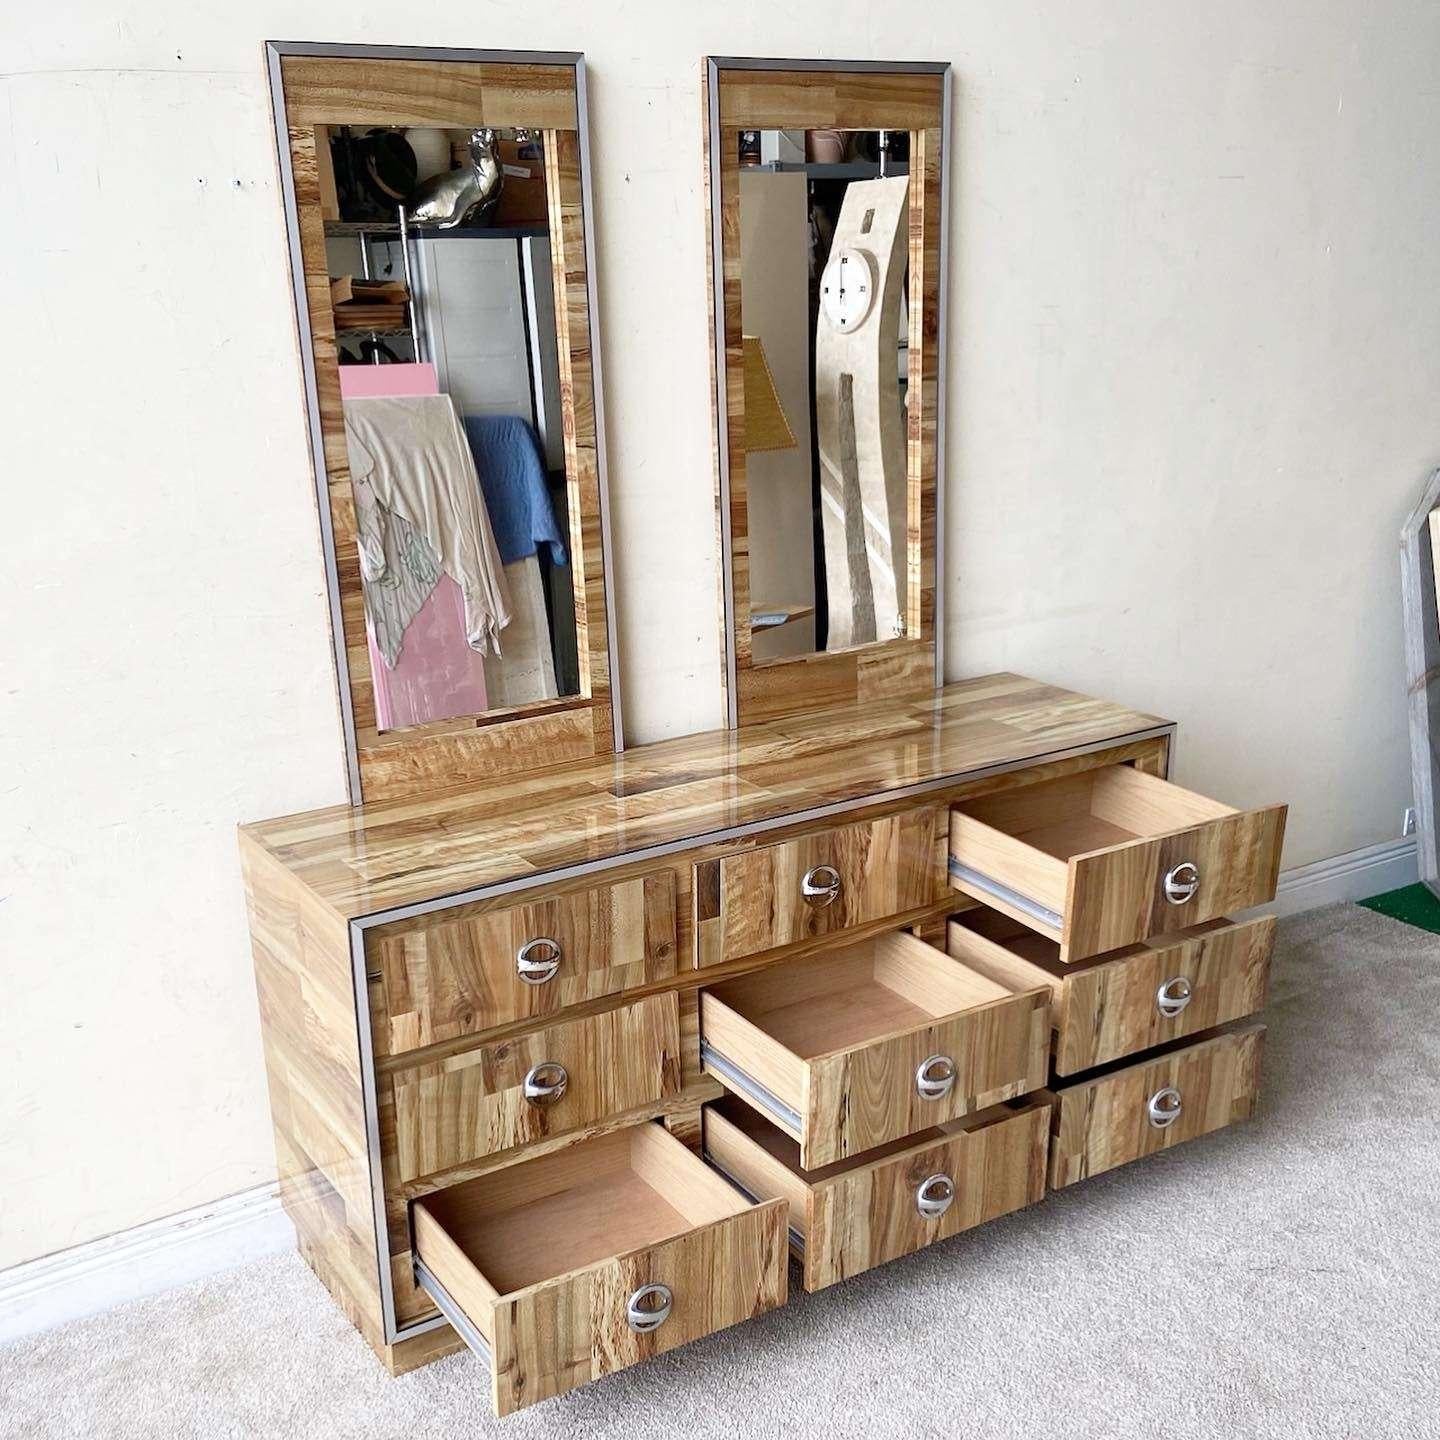 Exceptional vintage postmodern triple dresser with two matching mirrors. Each features a Woodgrain laminate with a silver edges.

Each mirror measures 19.5”W, .75”D, 43”H
